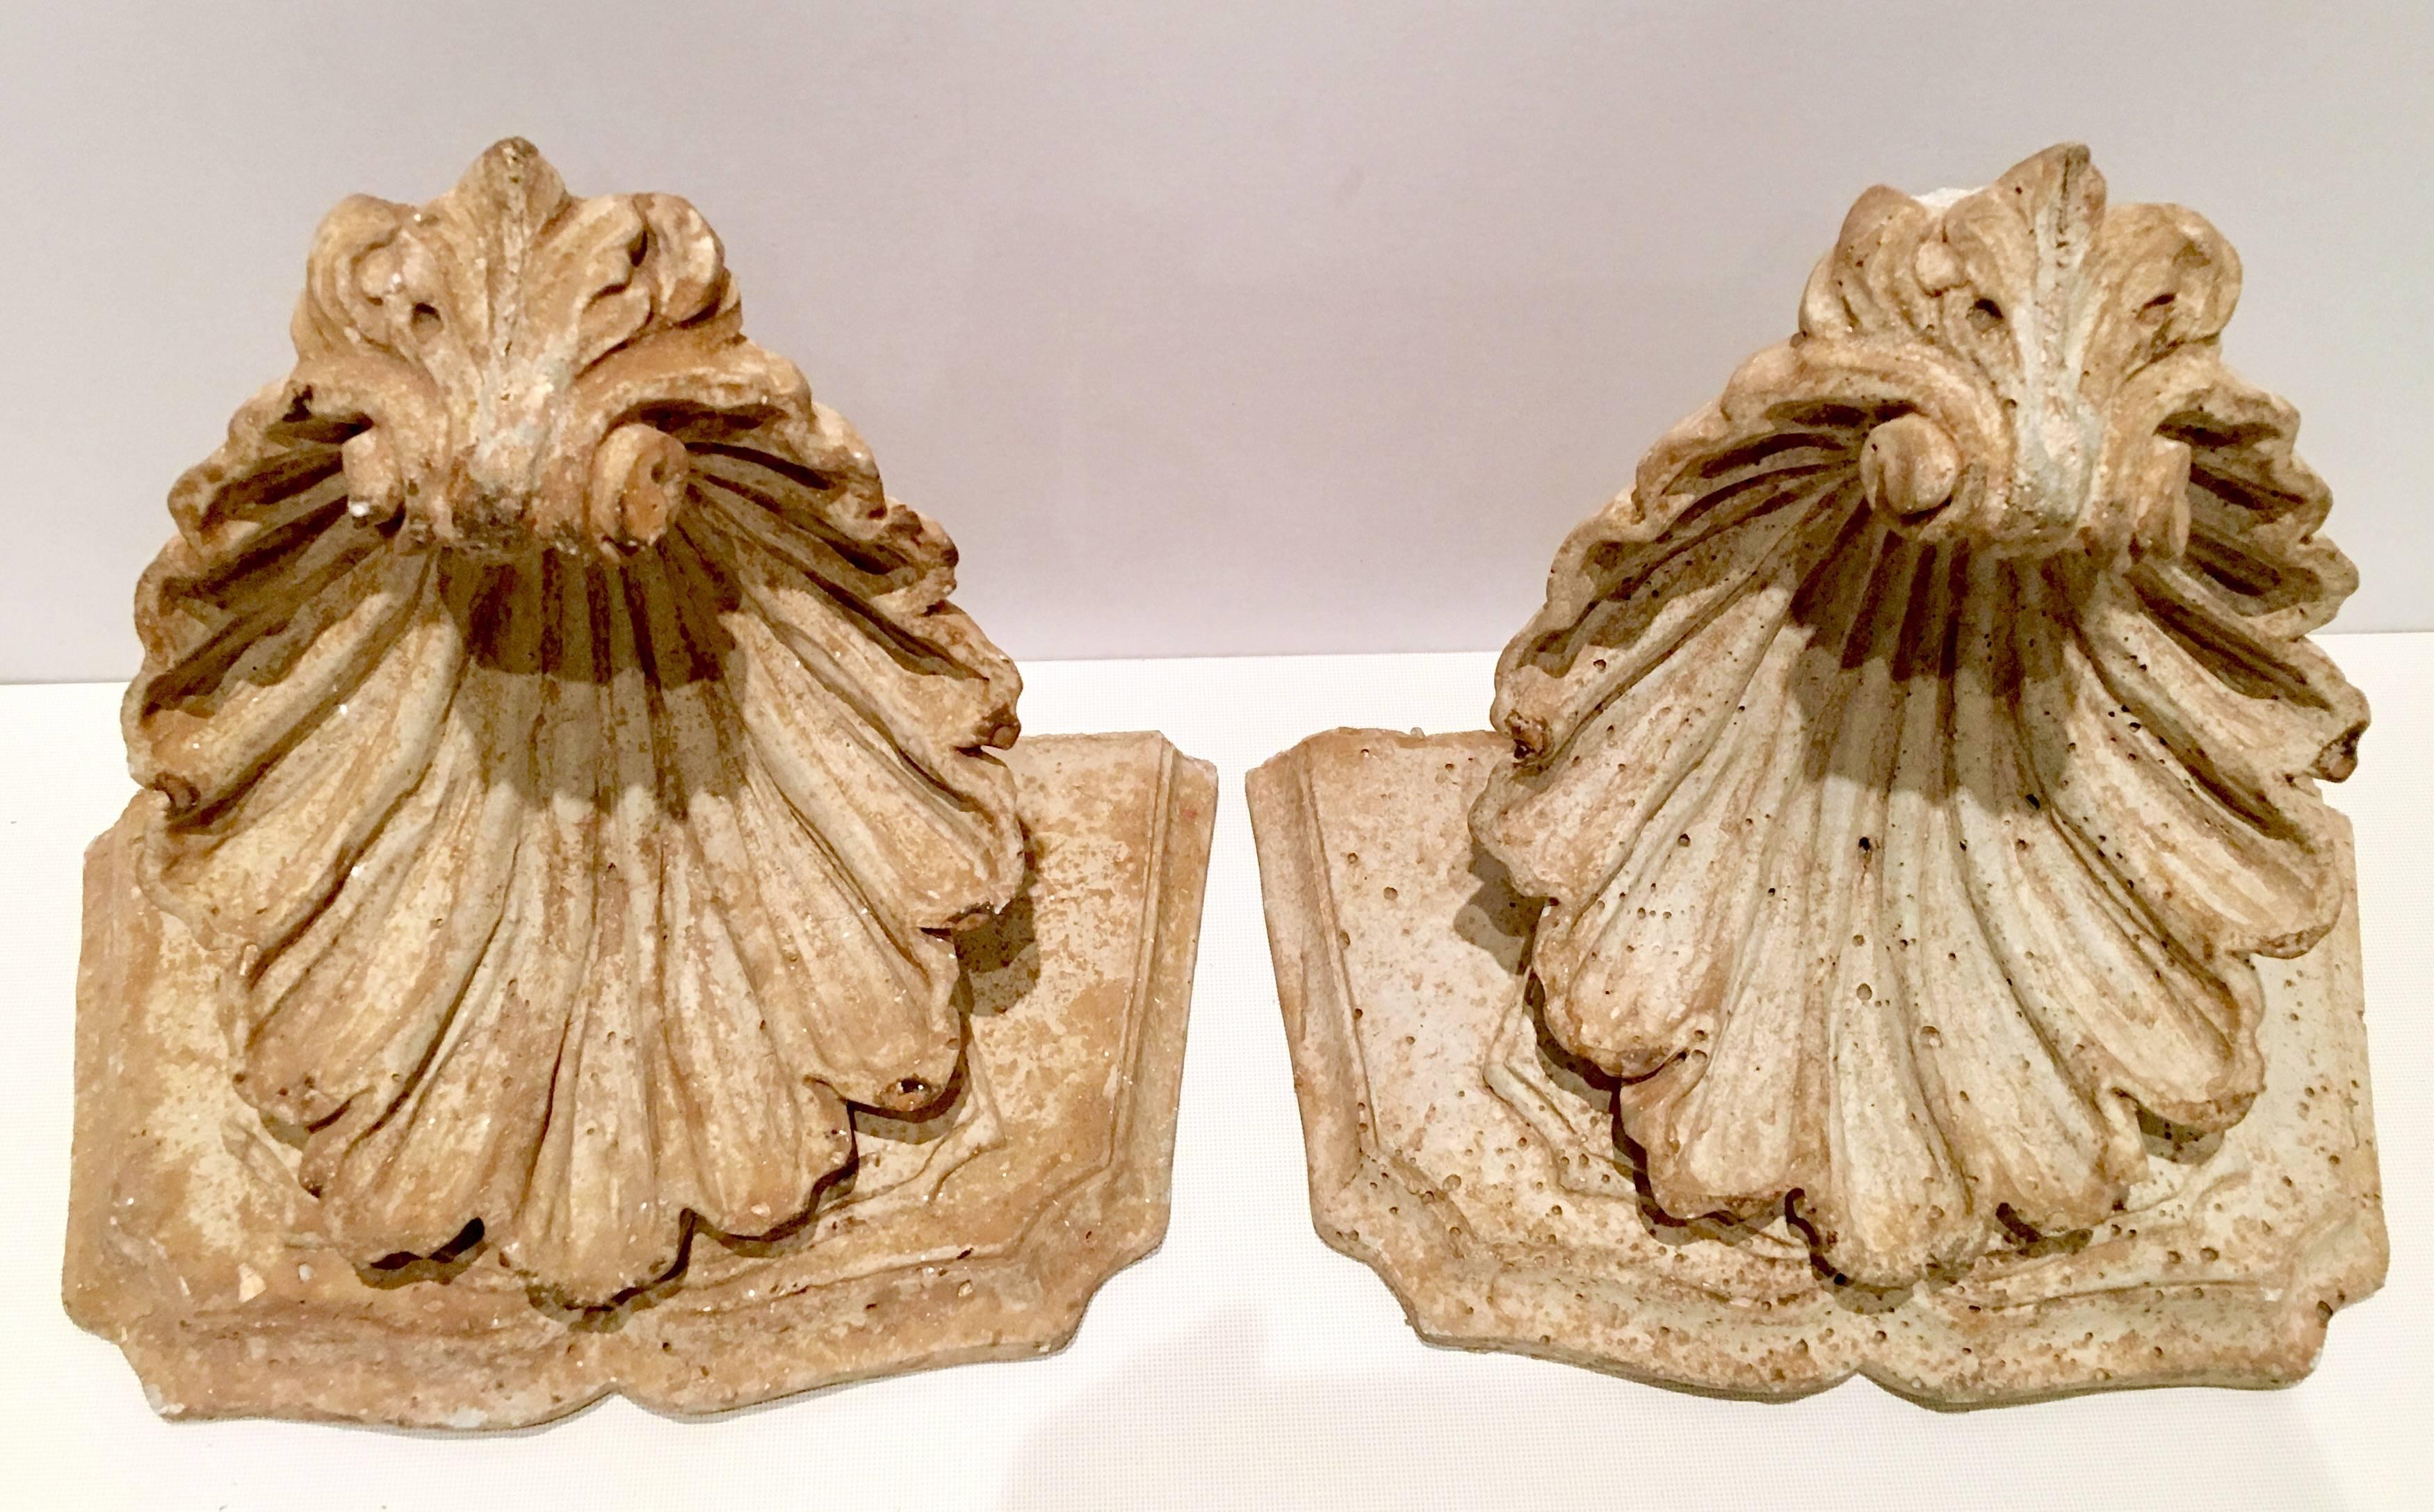 Classic 20th Century pair of cast stone scallop shell corbel/brackets. Procured from a Palm Beach estate, in magnificent pristine condition for their age. Each piece has ready to hang hardware installed.